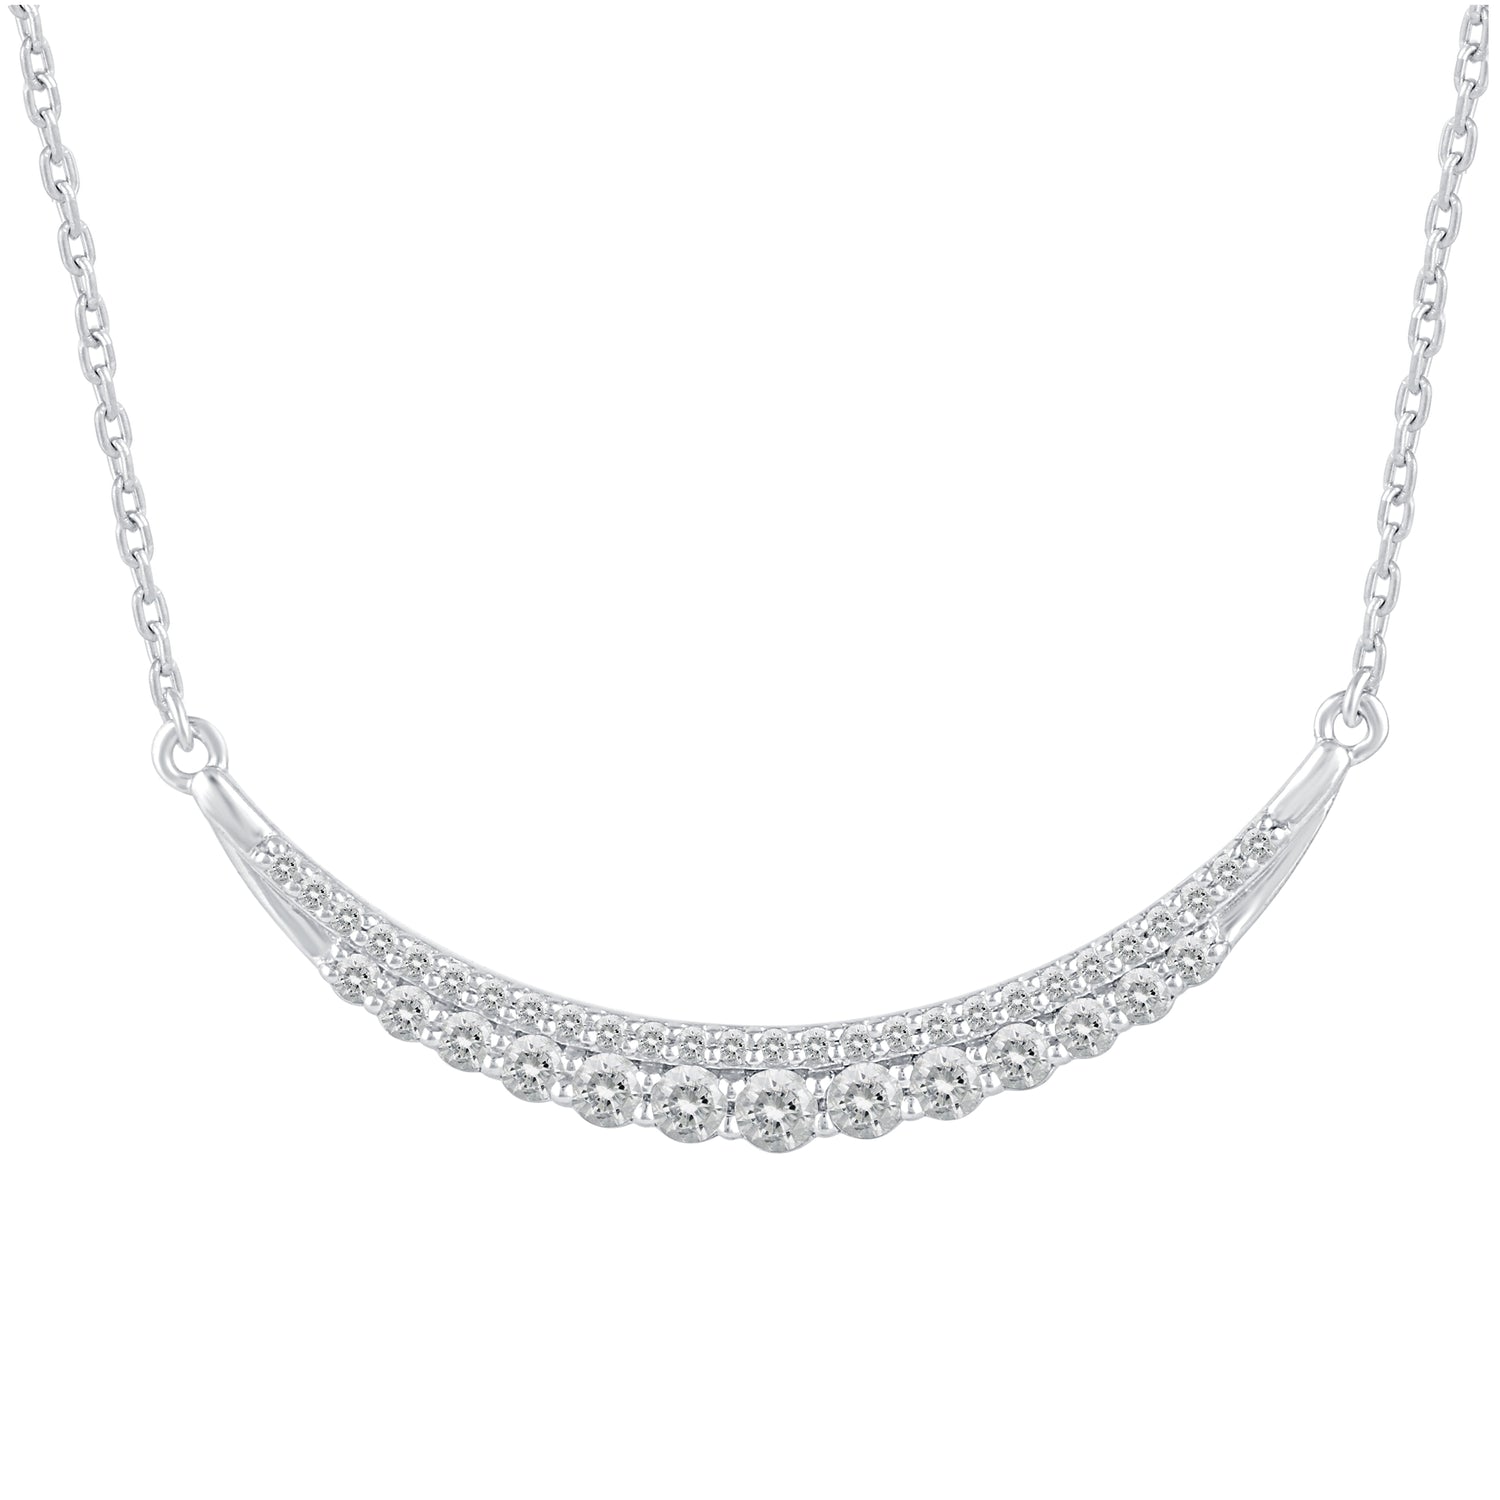 1/2 - 1/5 Cttw Diamond Bar Pendant Necklace set in 925 Sterling Silver